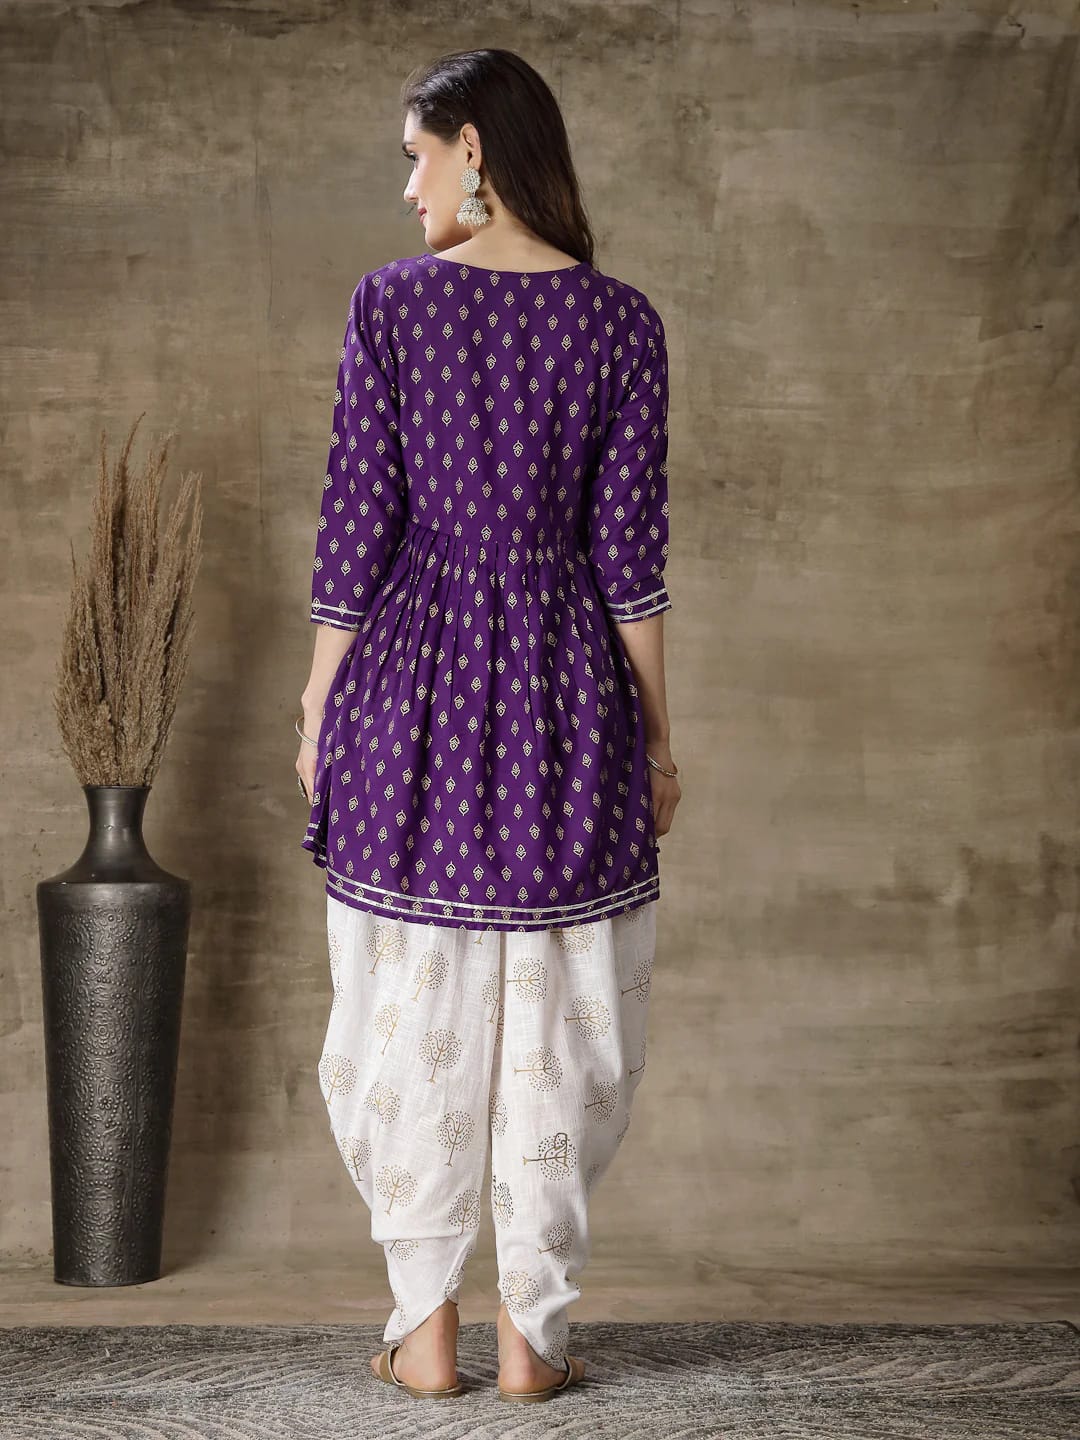 Violet Kurti Dhoti Set with Gold Prints, Embroidery & Gota Lace